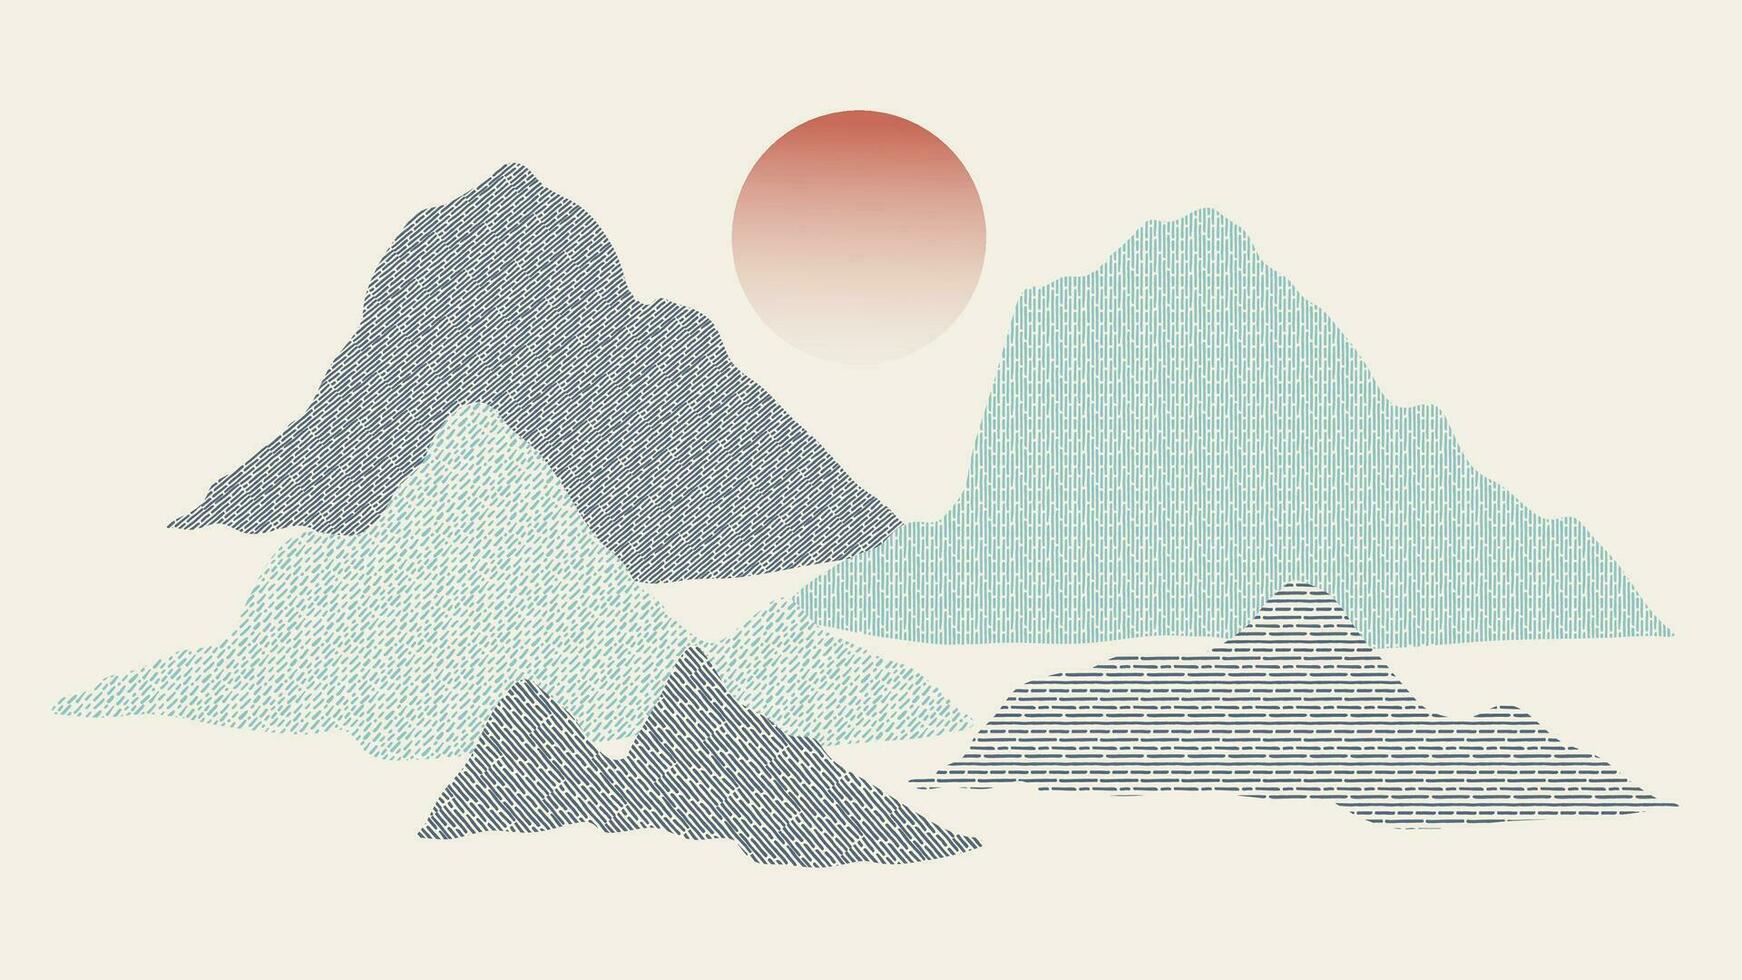 Mountain in oriental style background vector. Chinese landscape with dot pattern, hills, sun,line art, Japanese pattern. Minimal mountains art wallpaper design for print, wall art, cover and interior. vector